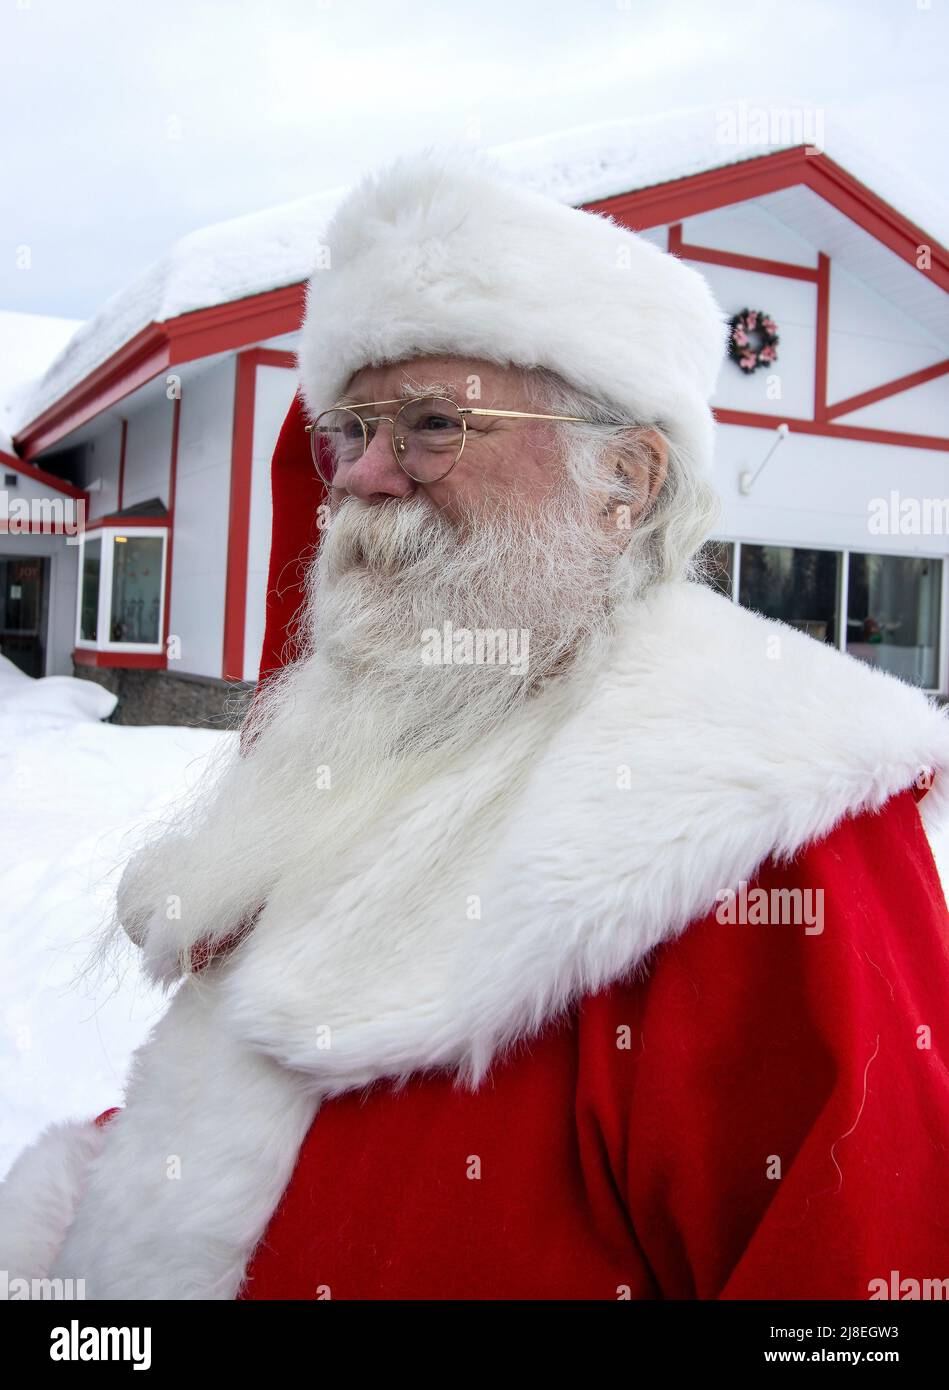 Santa Claus poses for pictures outside Santa Claus House in North Pole, AK, near Fairbanks, AK. Stock Photo